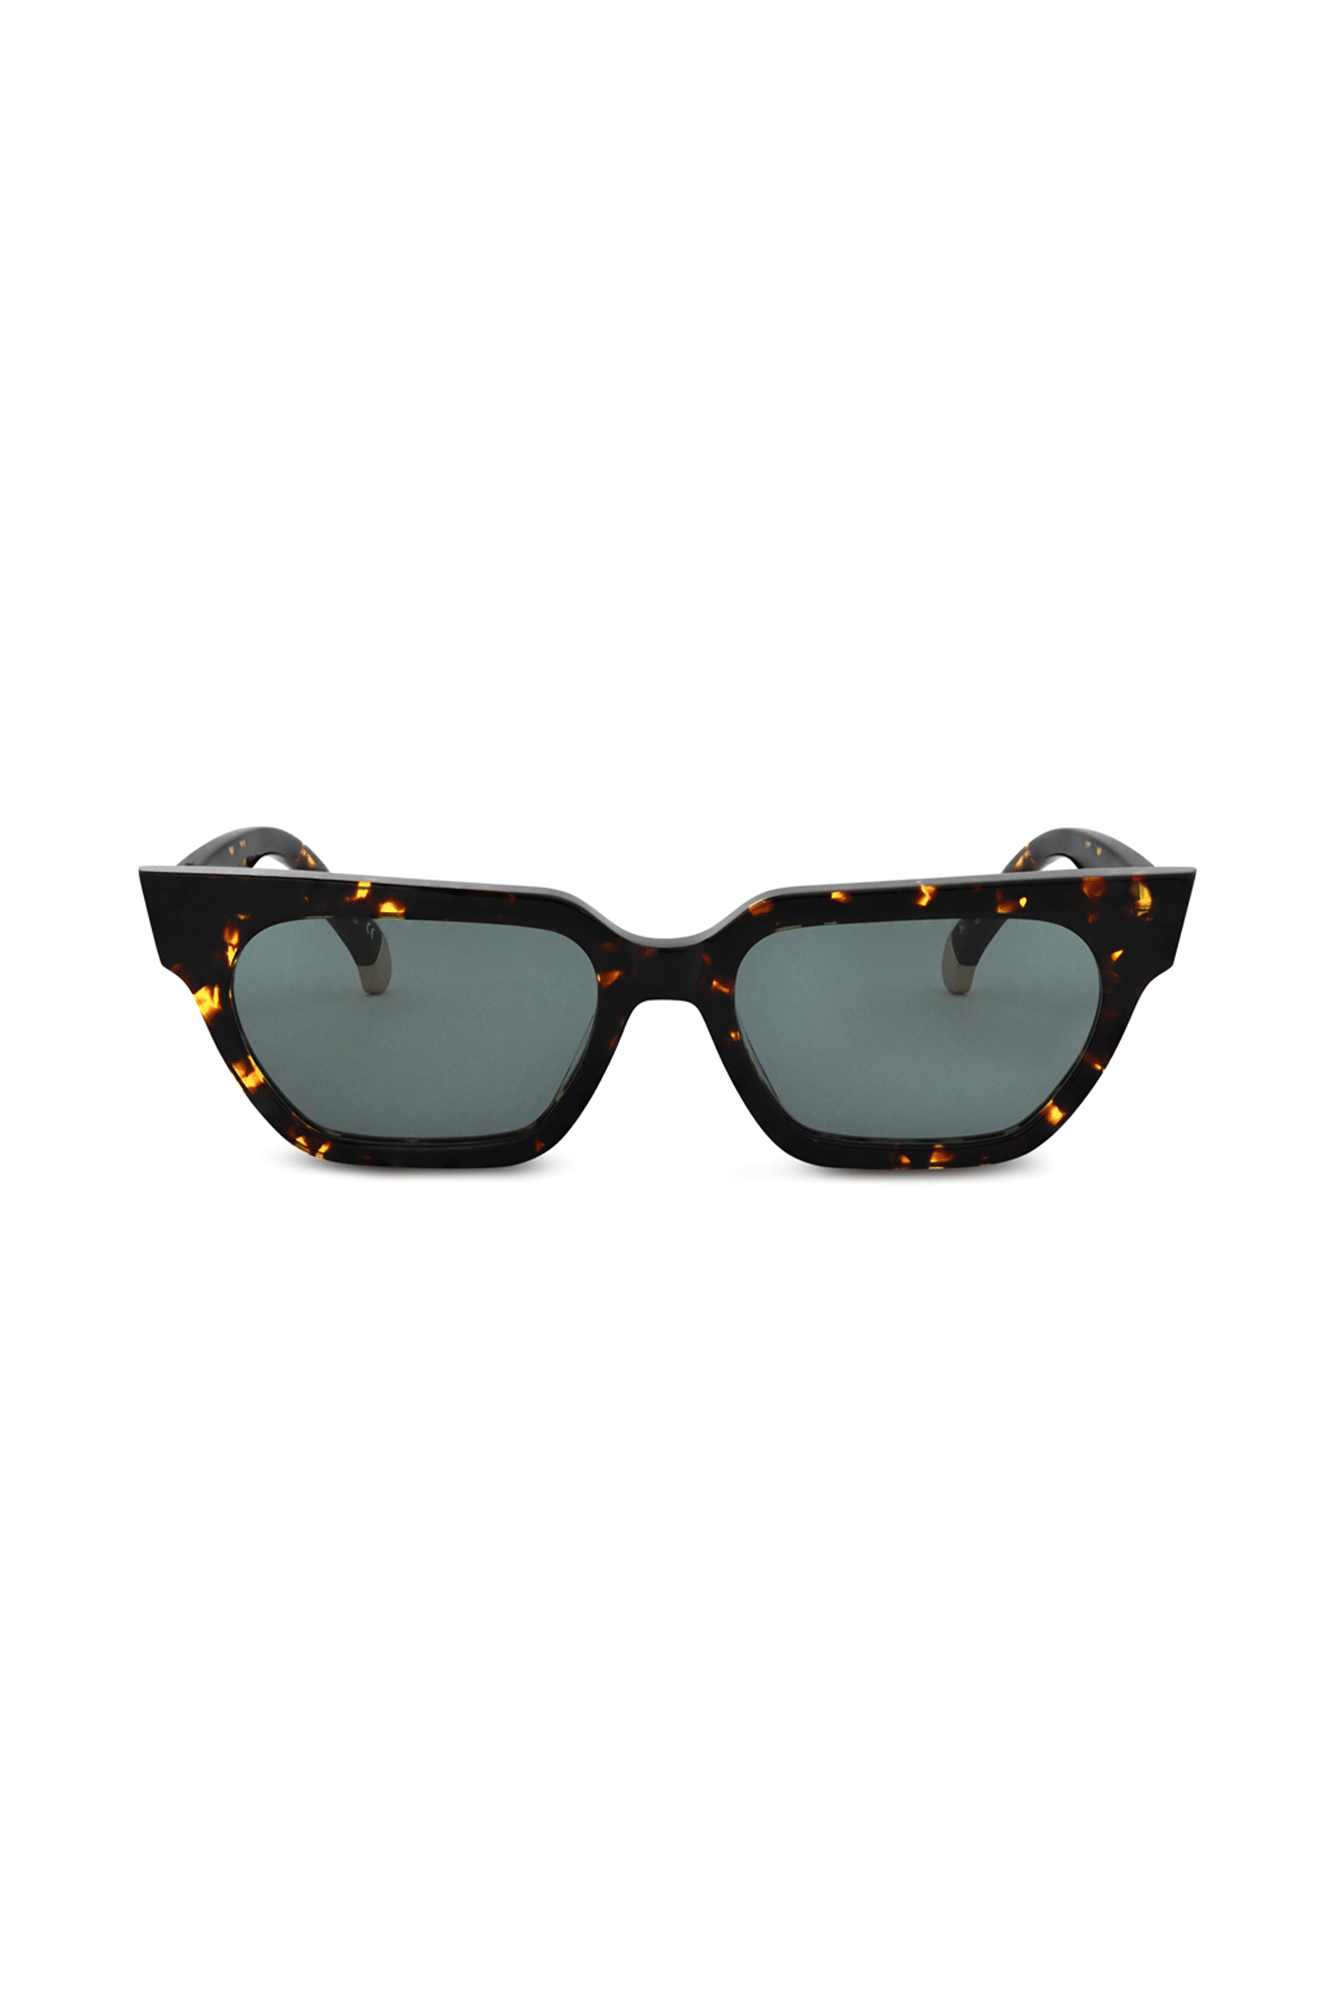 Make a statement with Oscar & Frank Eyewear's Raijin sunglasses. Handcrafted from exquisite Italian acetate, these unisex sunglasses feature a captivating fusion of mythical inspiration and contemporary design. Featuring a bold silhouette and refined aesthetics, the Raijin sunglasses exude strength and charisma. Elevate your style and embrace modern mythology with the Raijin.